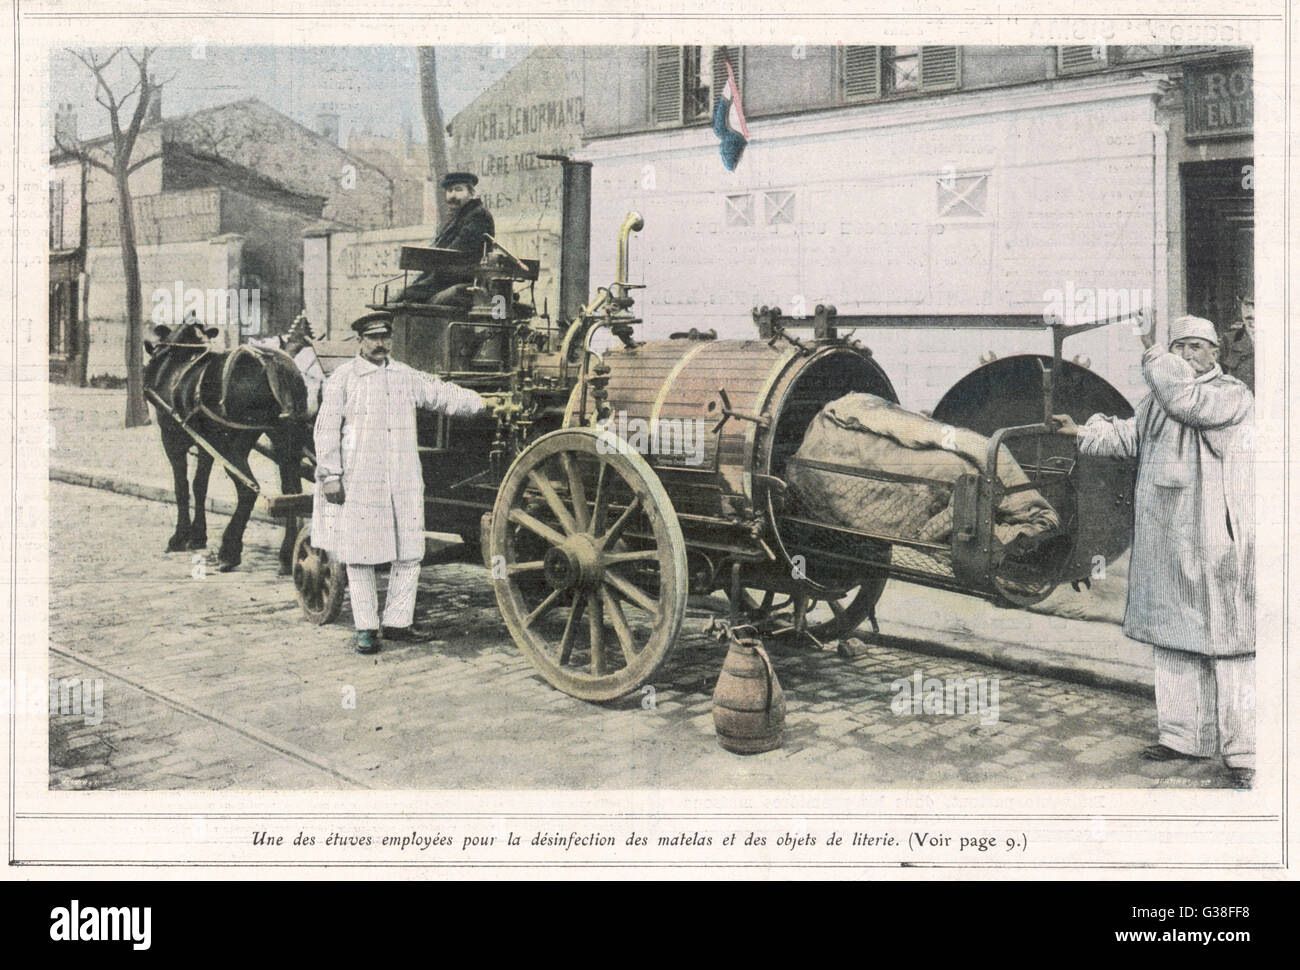 DISINFECTING A HOME Infected bedlinen is fumigated  in a horse-drawn portable  'Stove' to destroy germs of  tuberculosis or cholera       Date: 1905 Stock Photo